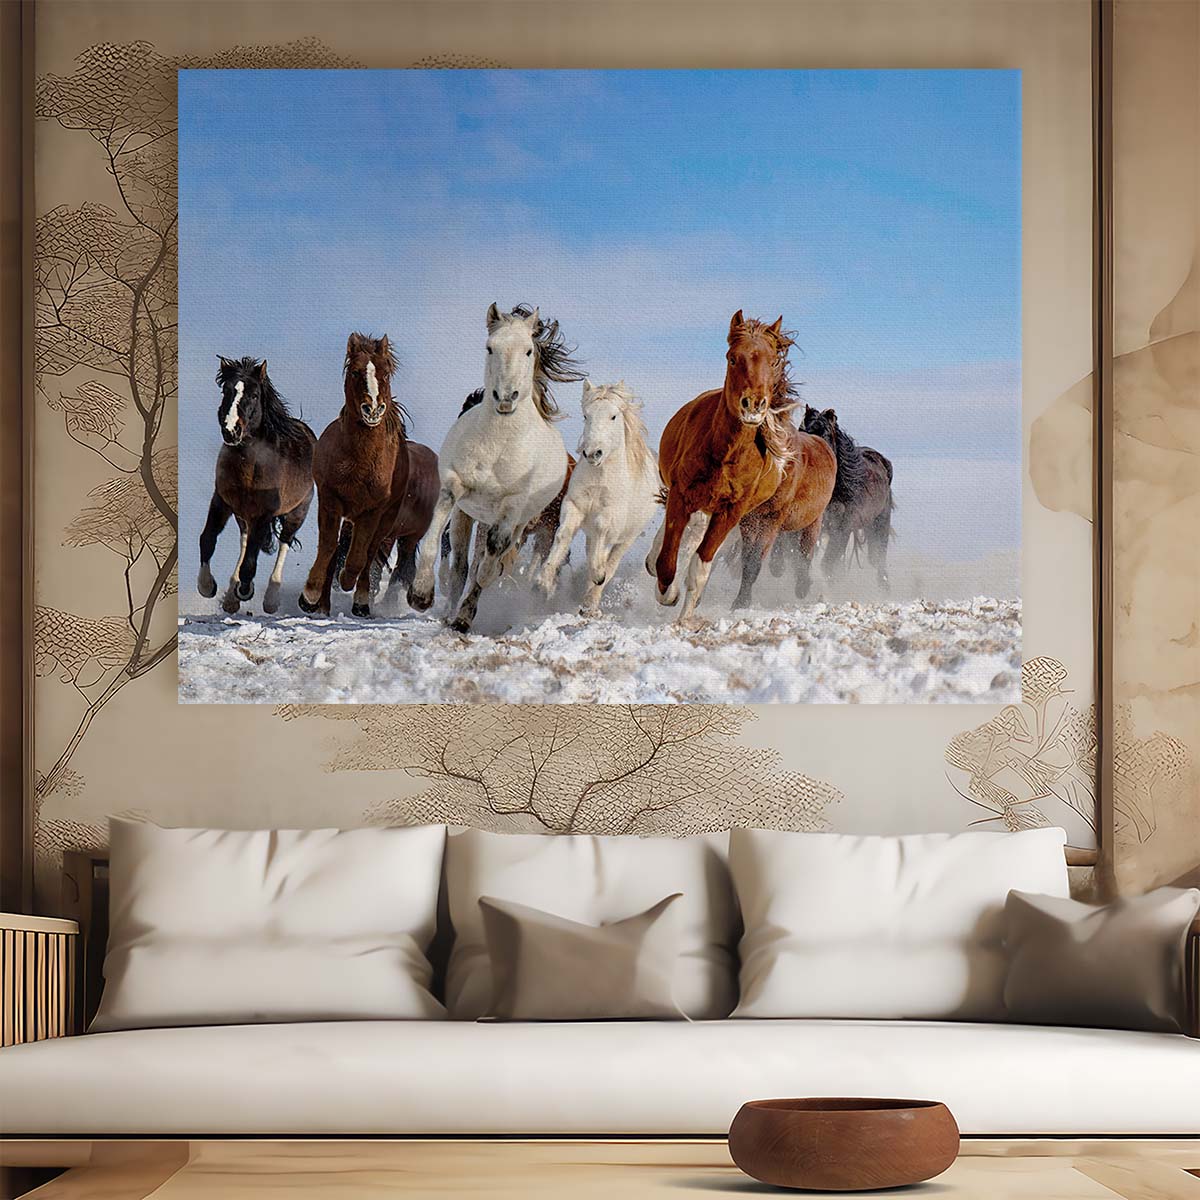 Gallop Through Snow Mongolian Horses Wall Art by Luxuriance Designs. Made in USA.